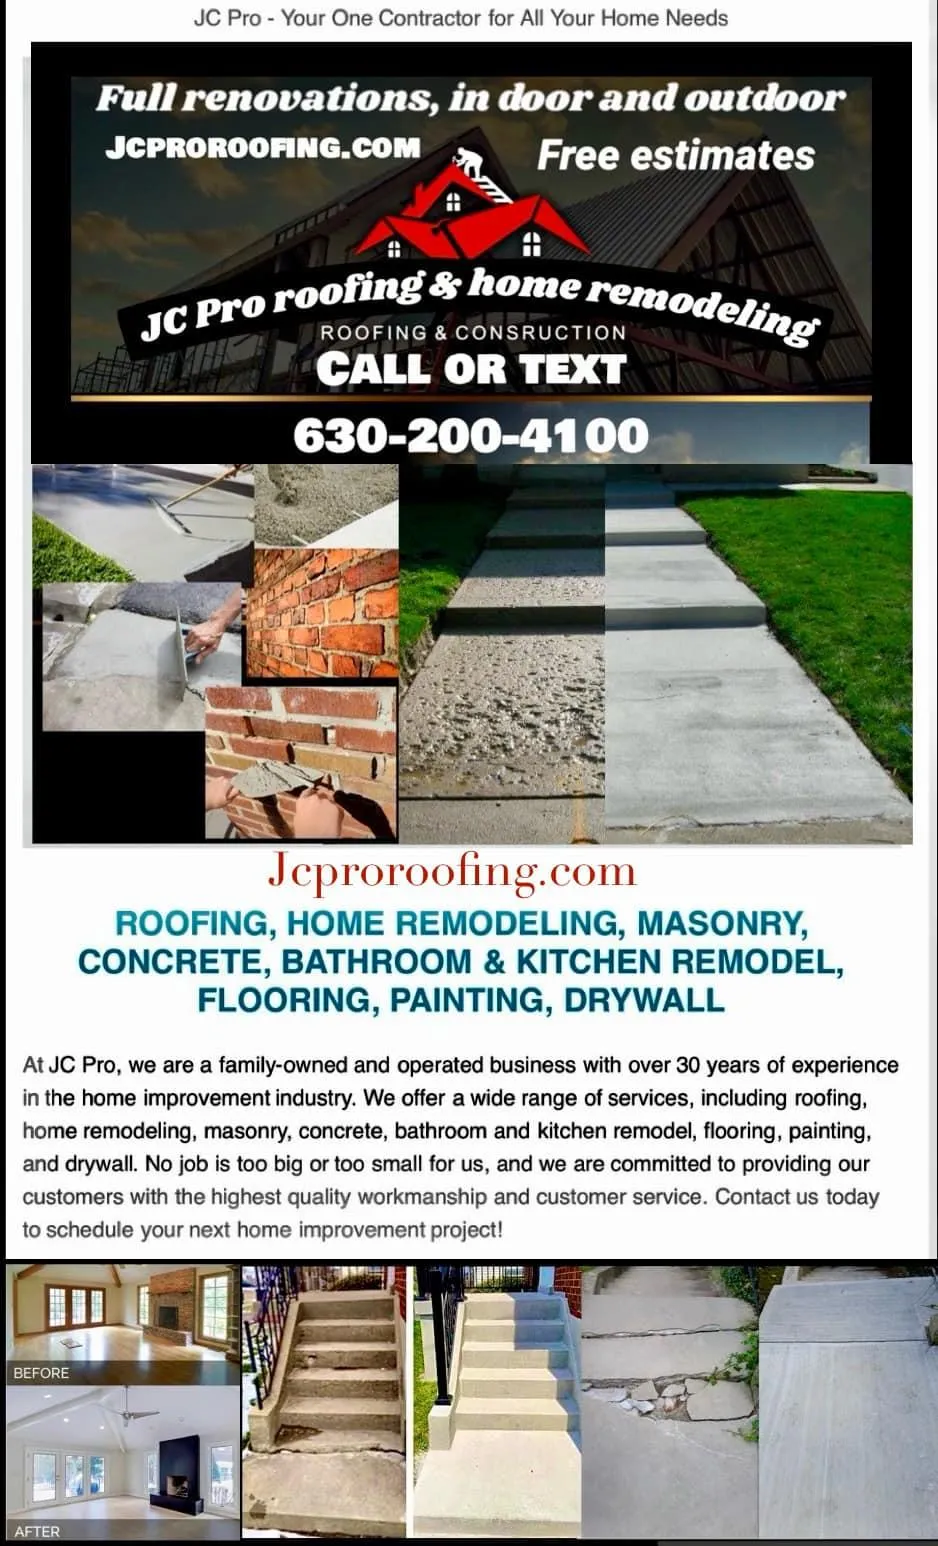 Roofing Installation for JC Pro Roofing in Chicago, IL